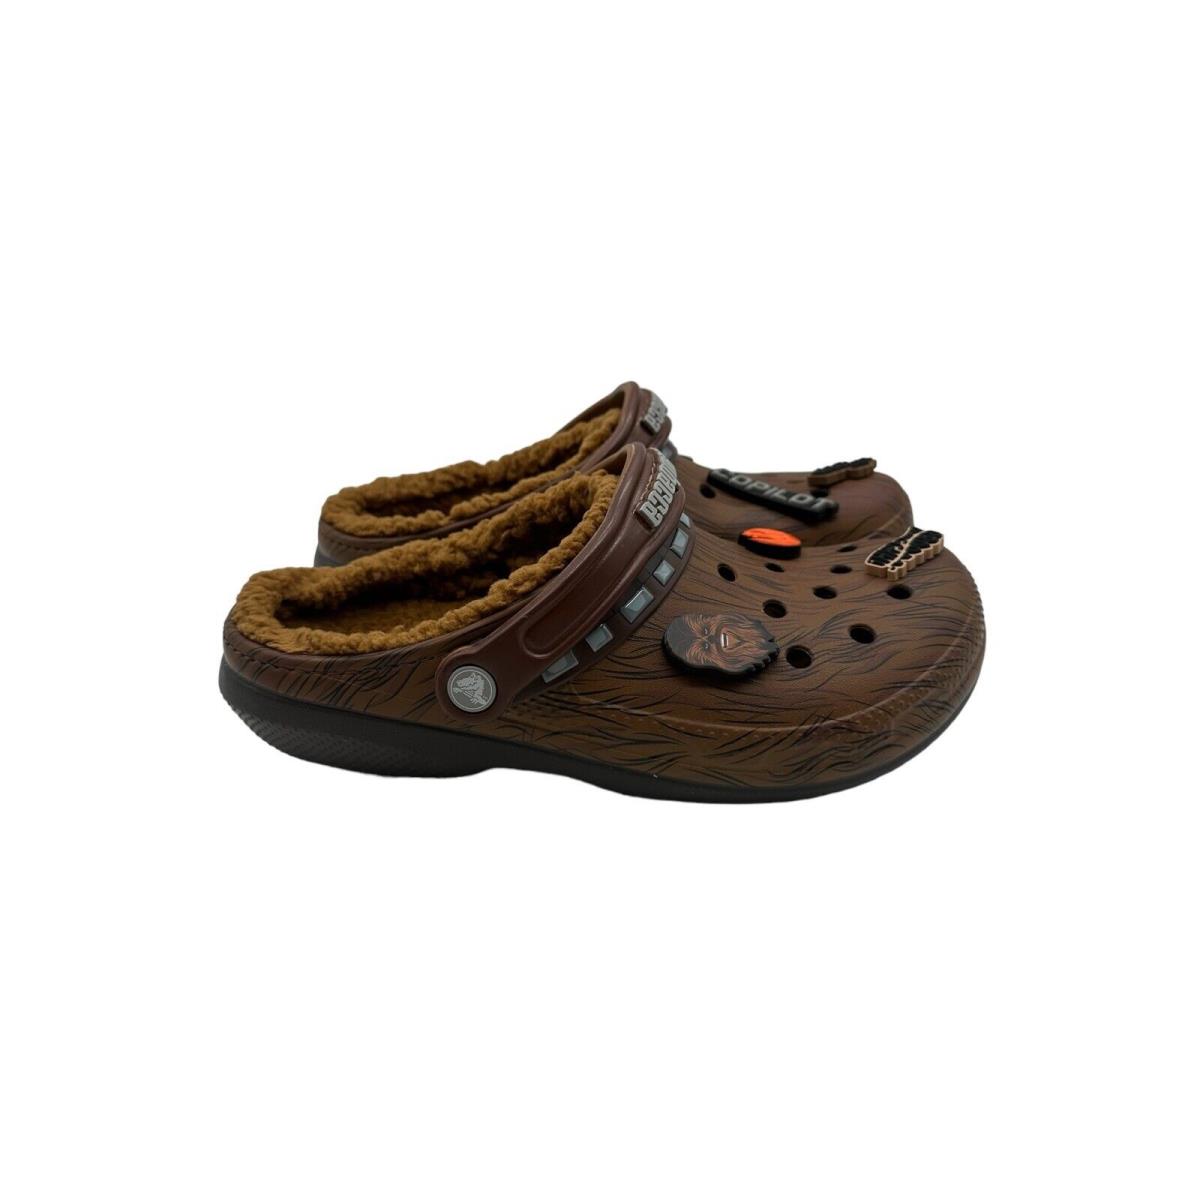 Star Wars Chewbacca Crocs Classic Lined Clog 208858-206 Size Men`s 8 Women`s 10 - Brown